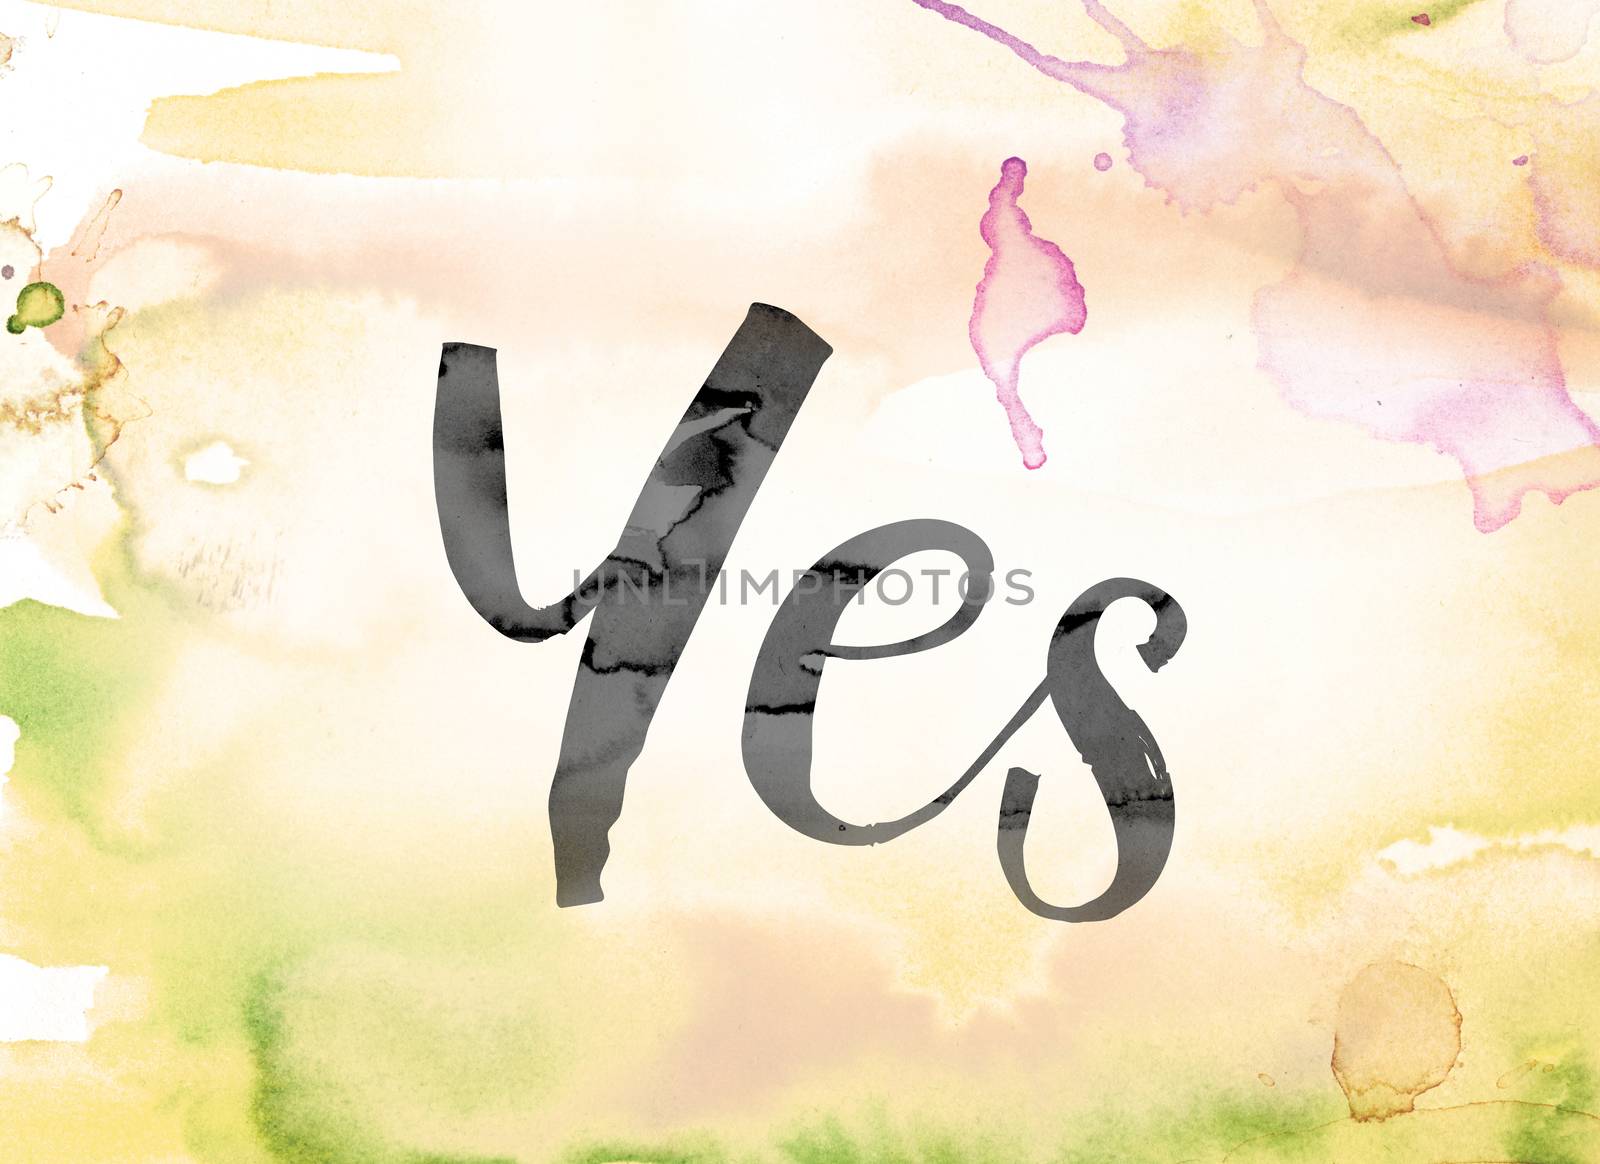 Yes Colorful Watercolor and Ink Word Art by enterlinedesign